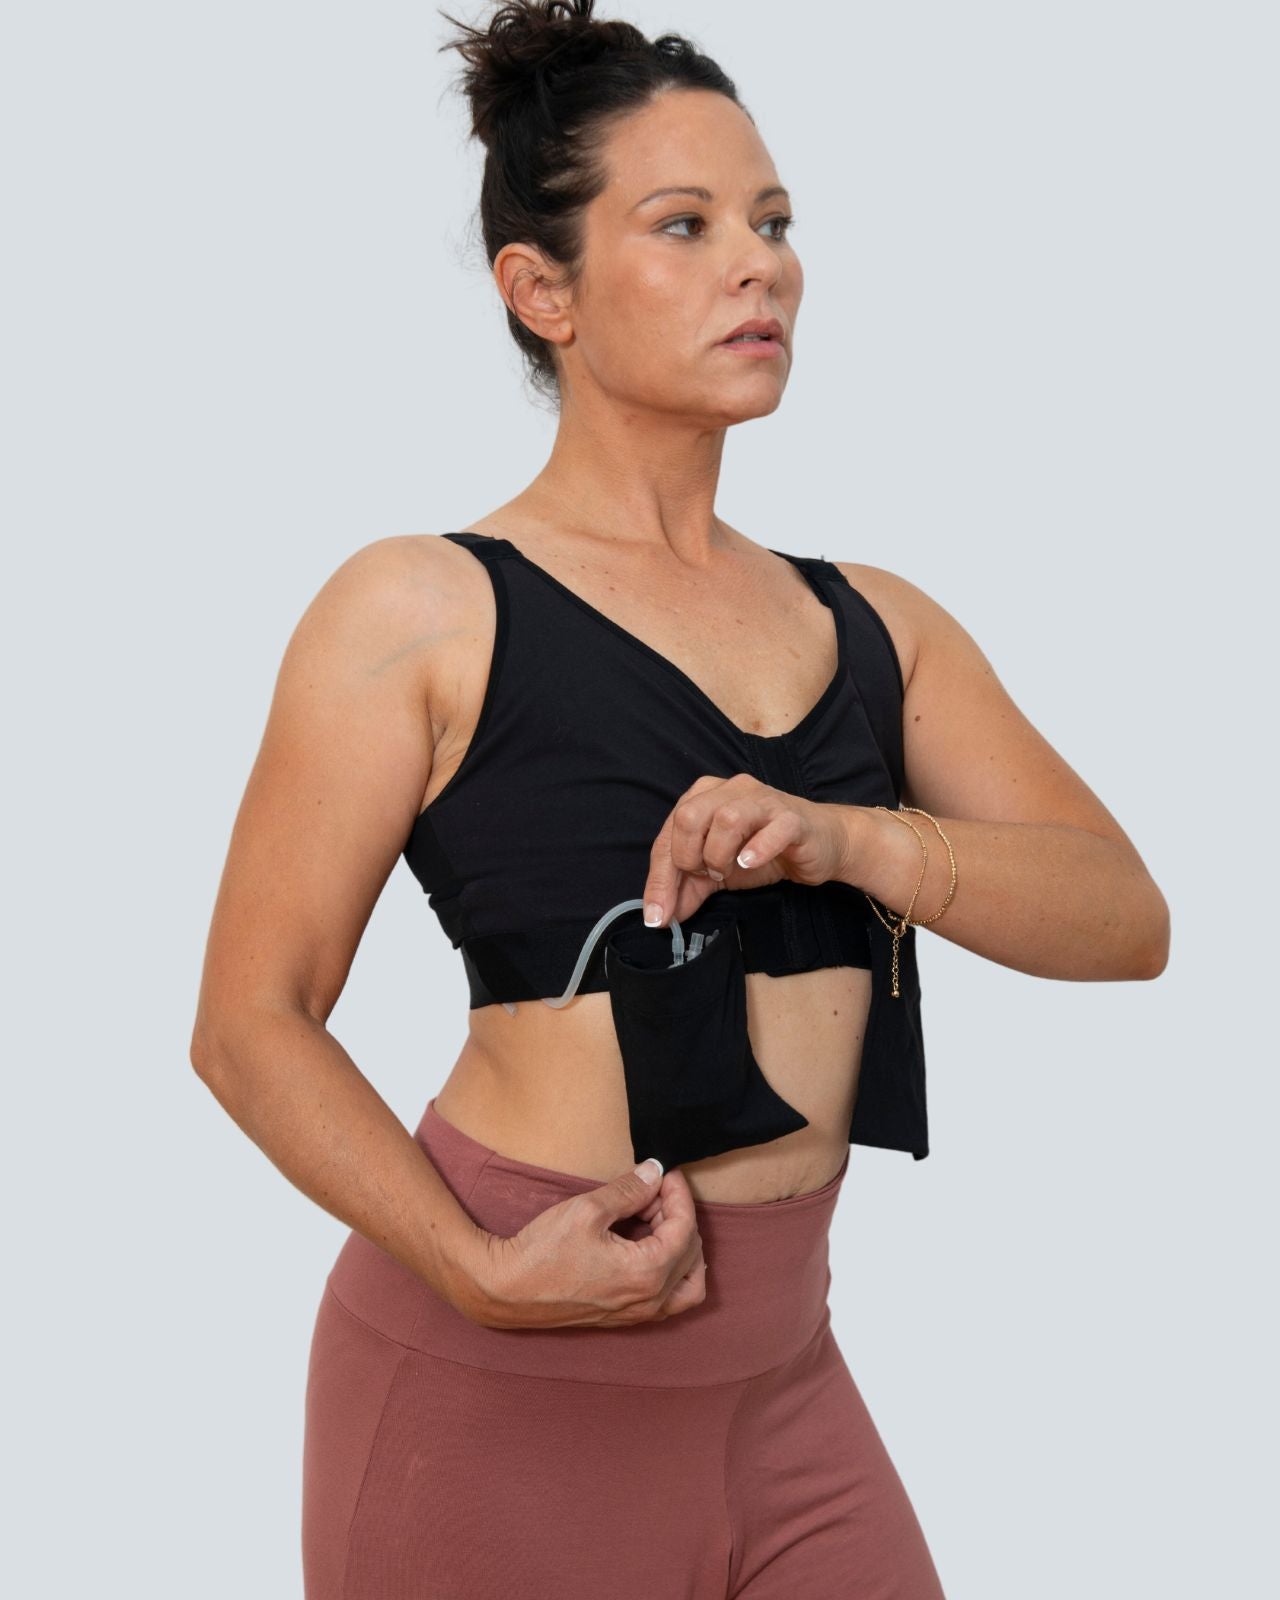 Front Closure Mastectomy Bra with Pockets